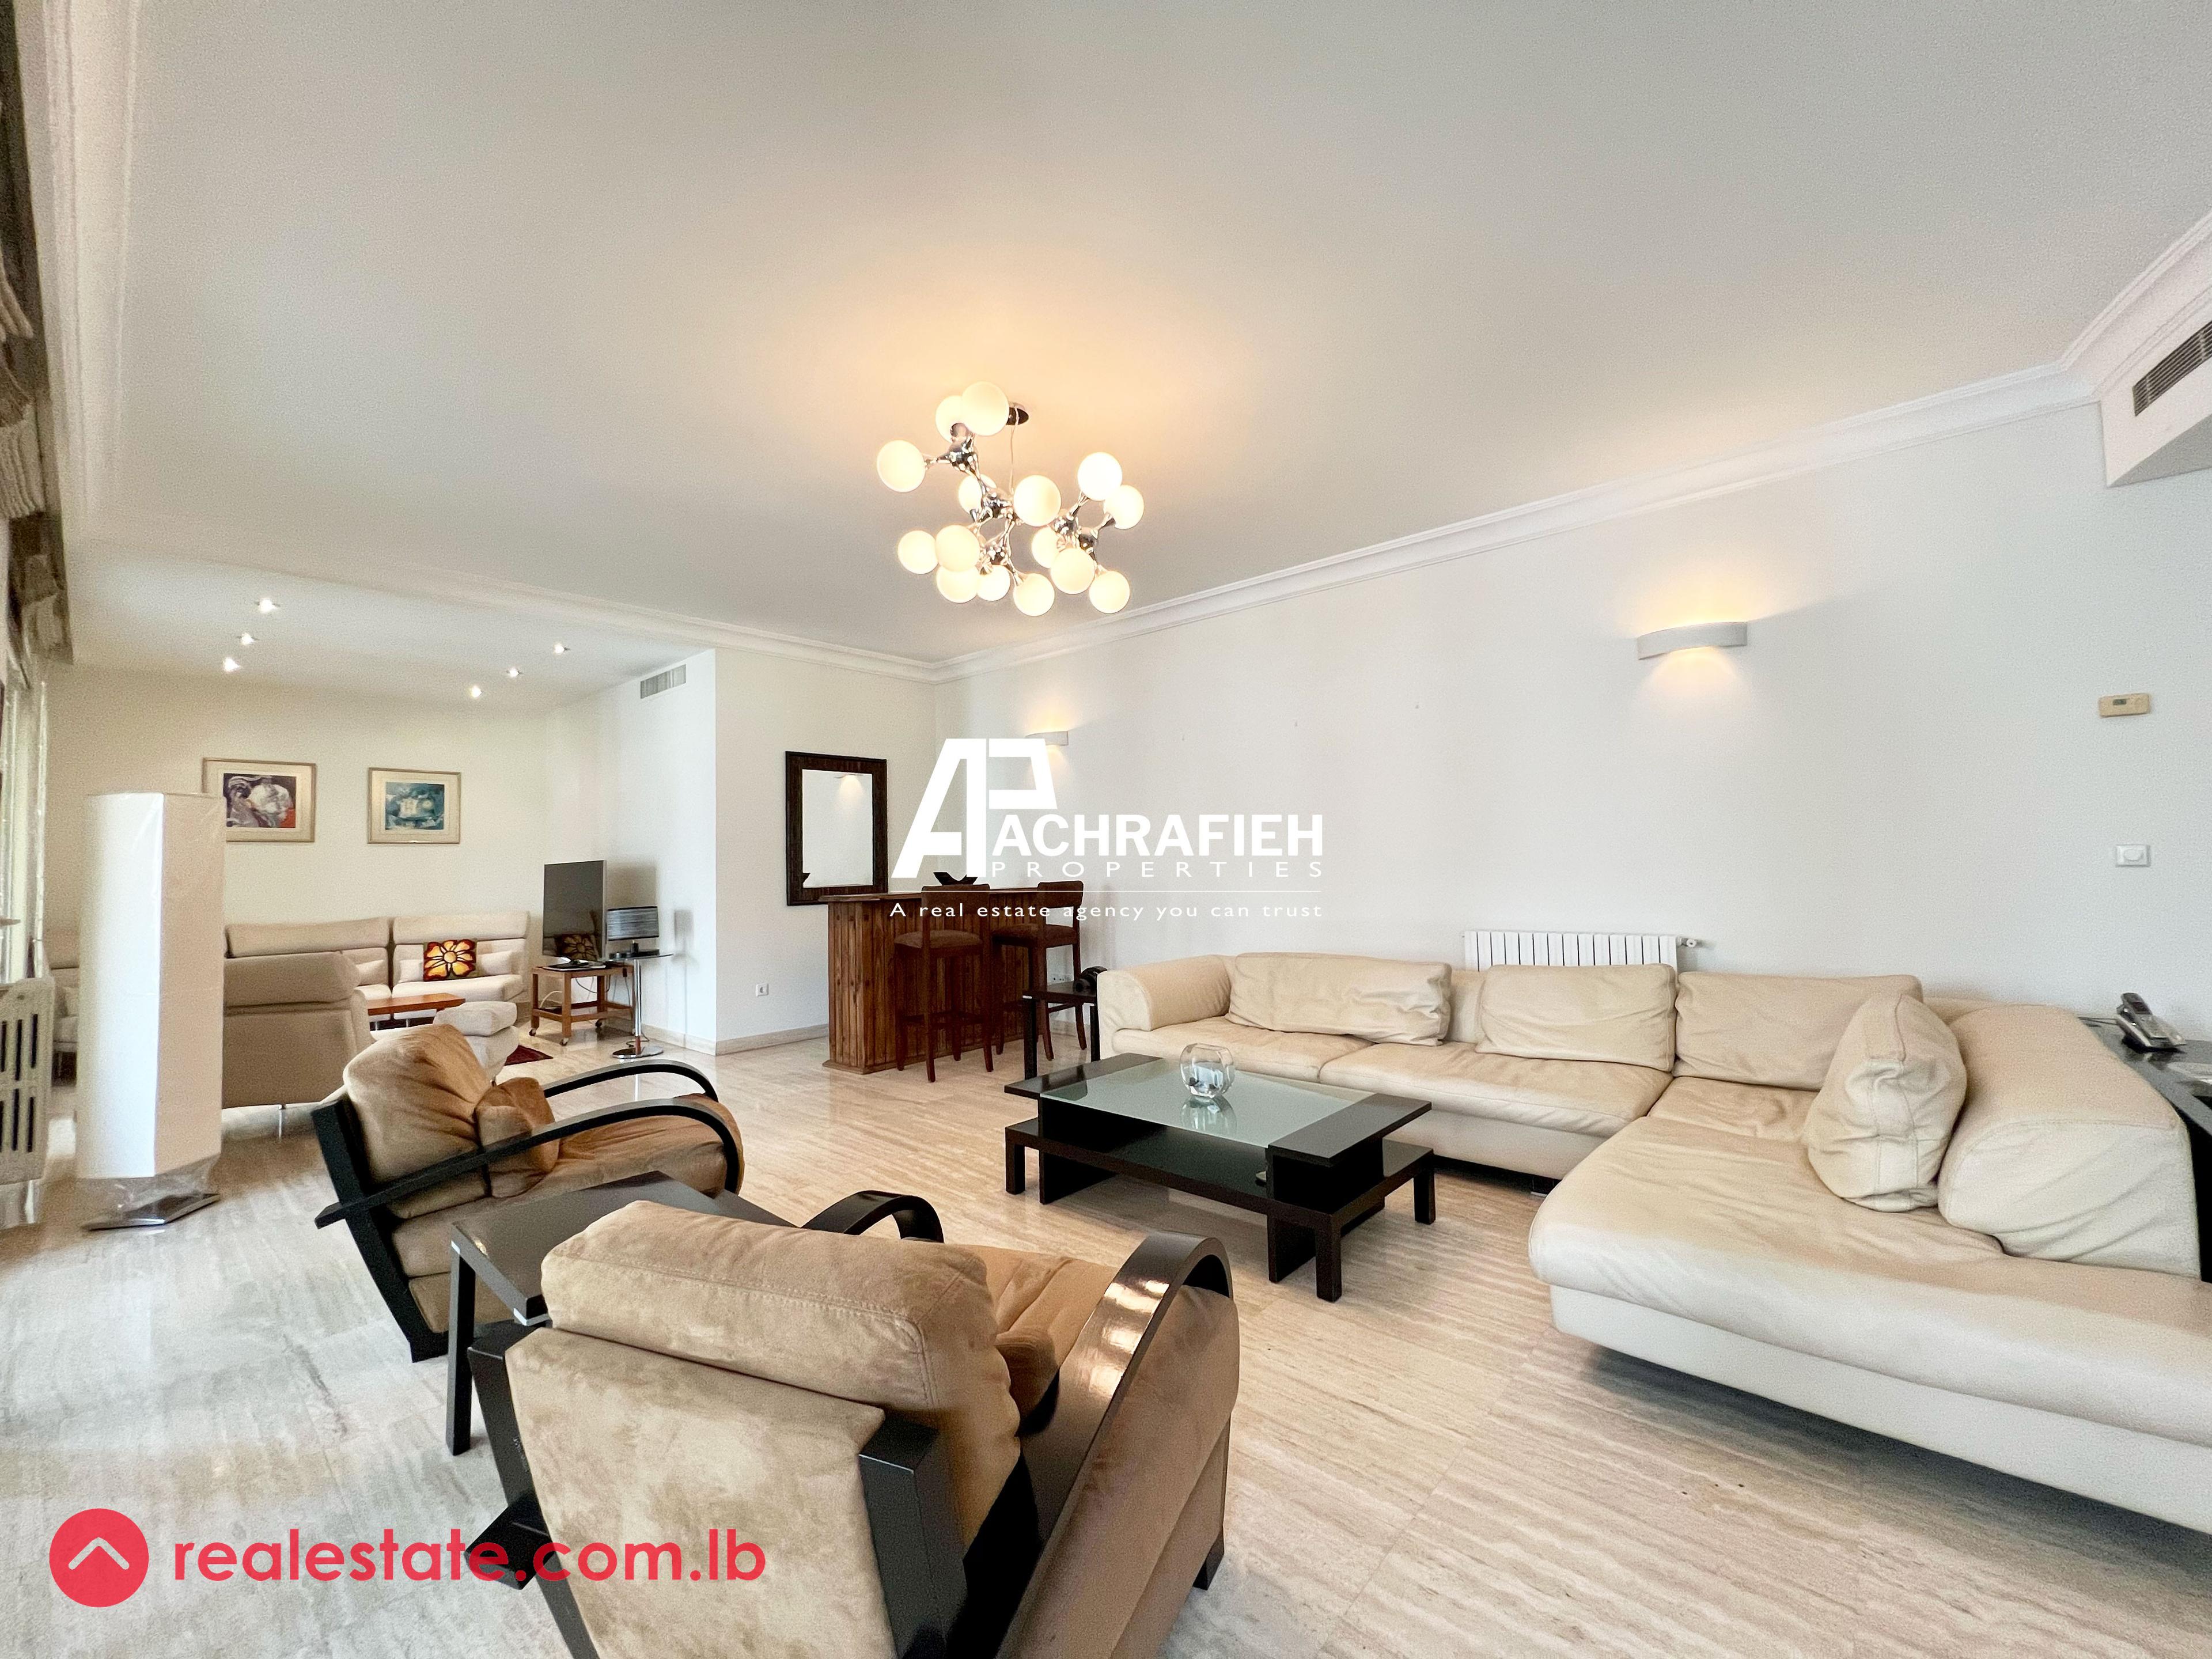 24/7 Electricity | Apartment For Sale | In Carré D’or Achrafieh